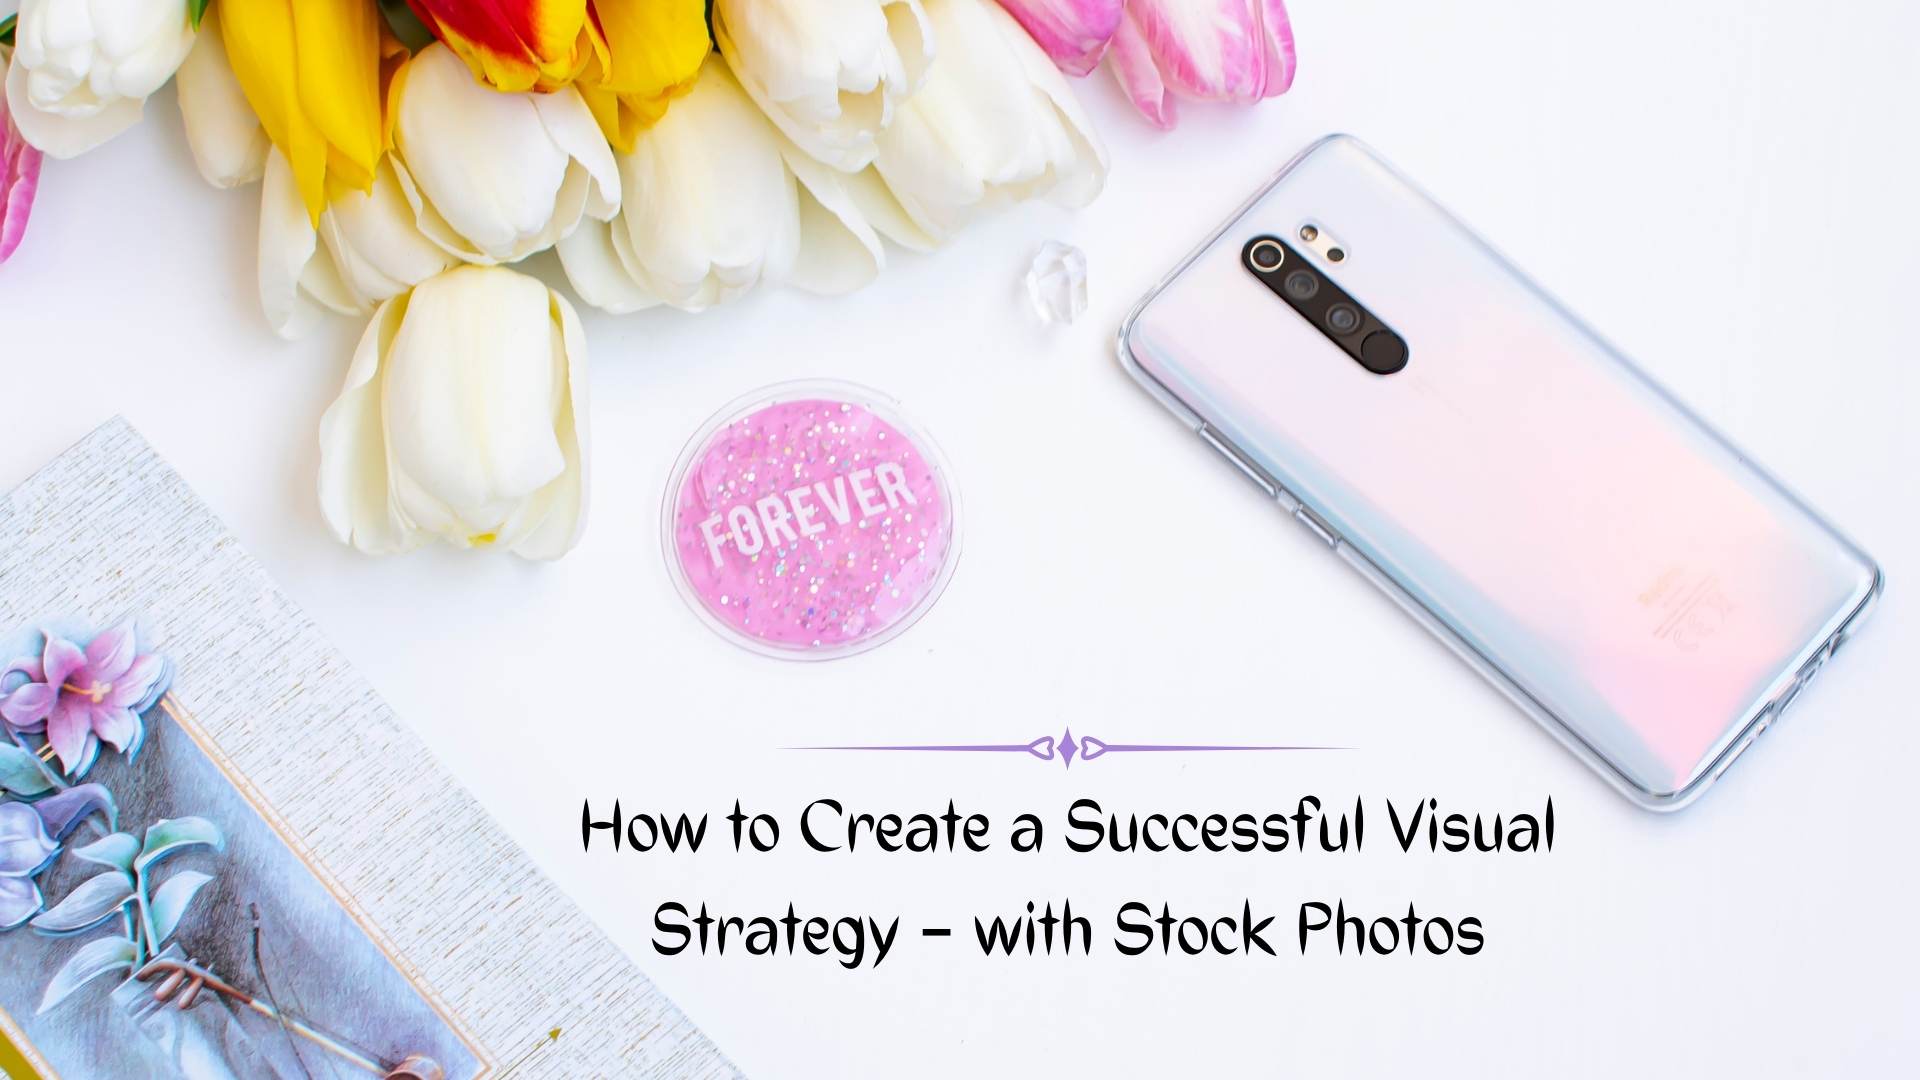 What Is the Importance of Visual Strategy? Strengthen It with Stock Photos